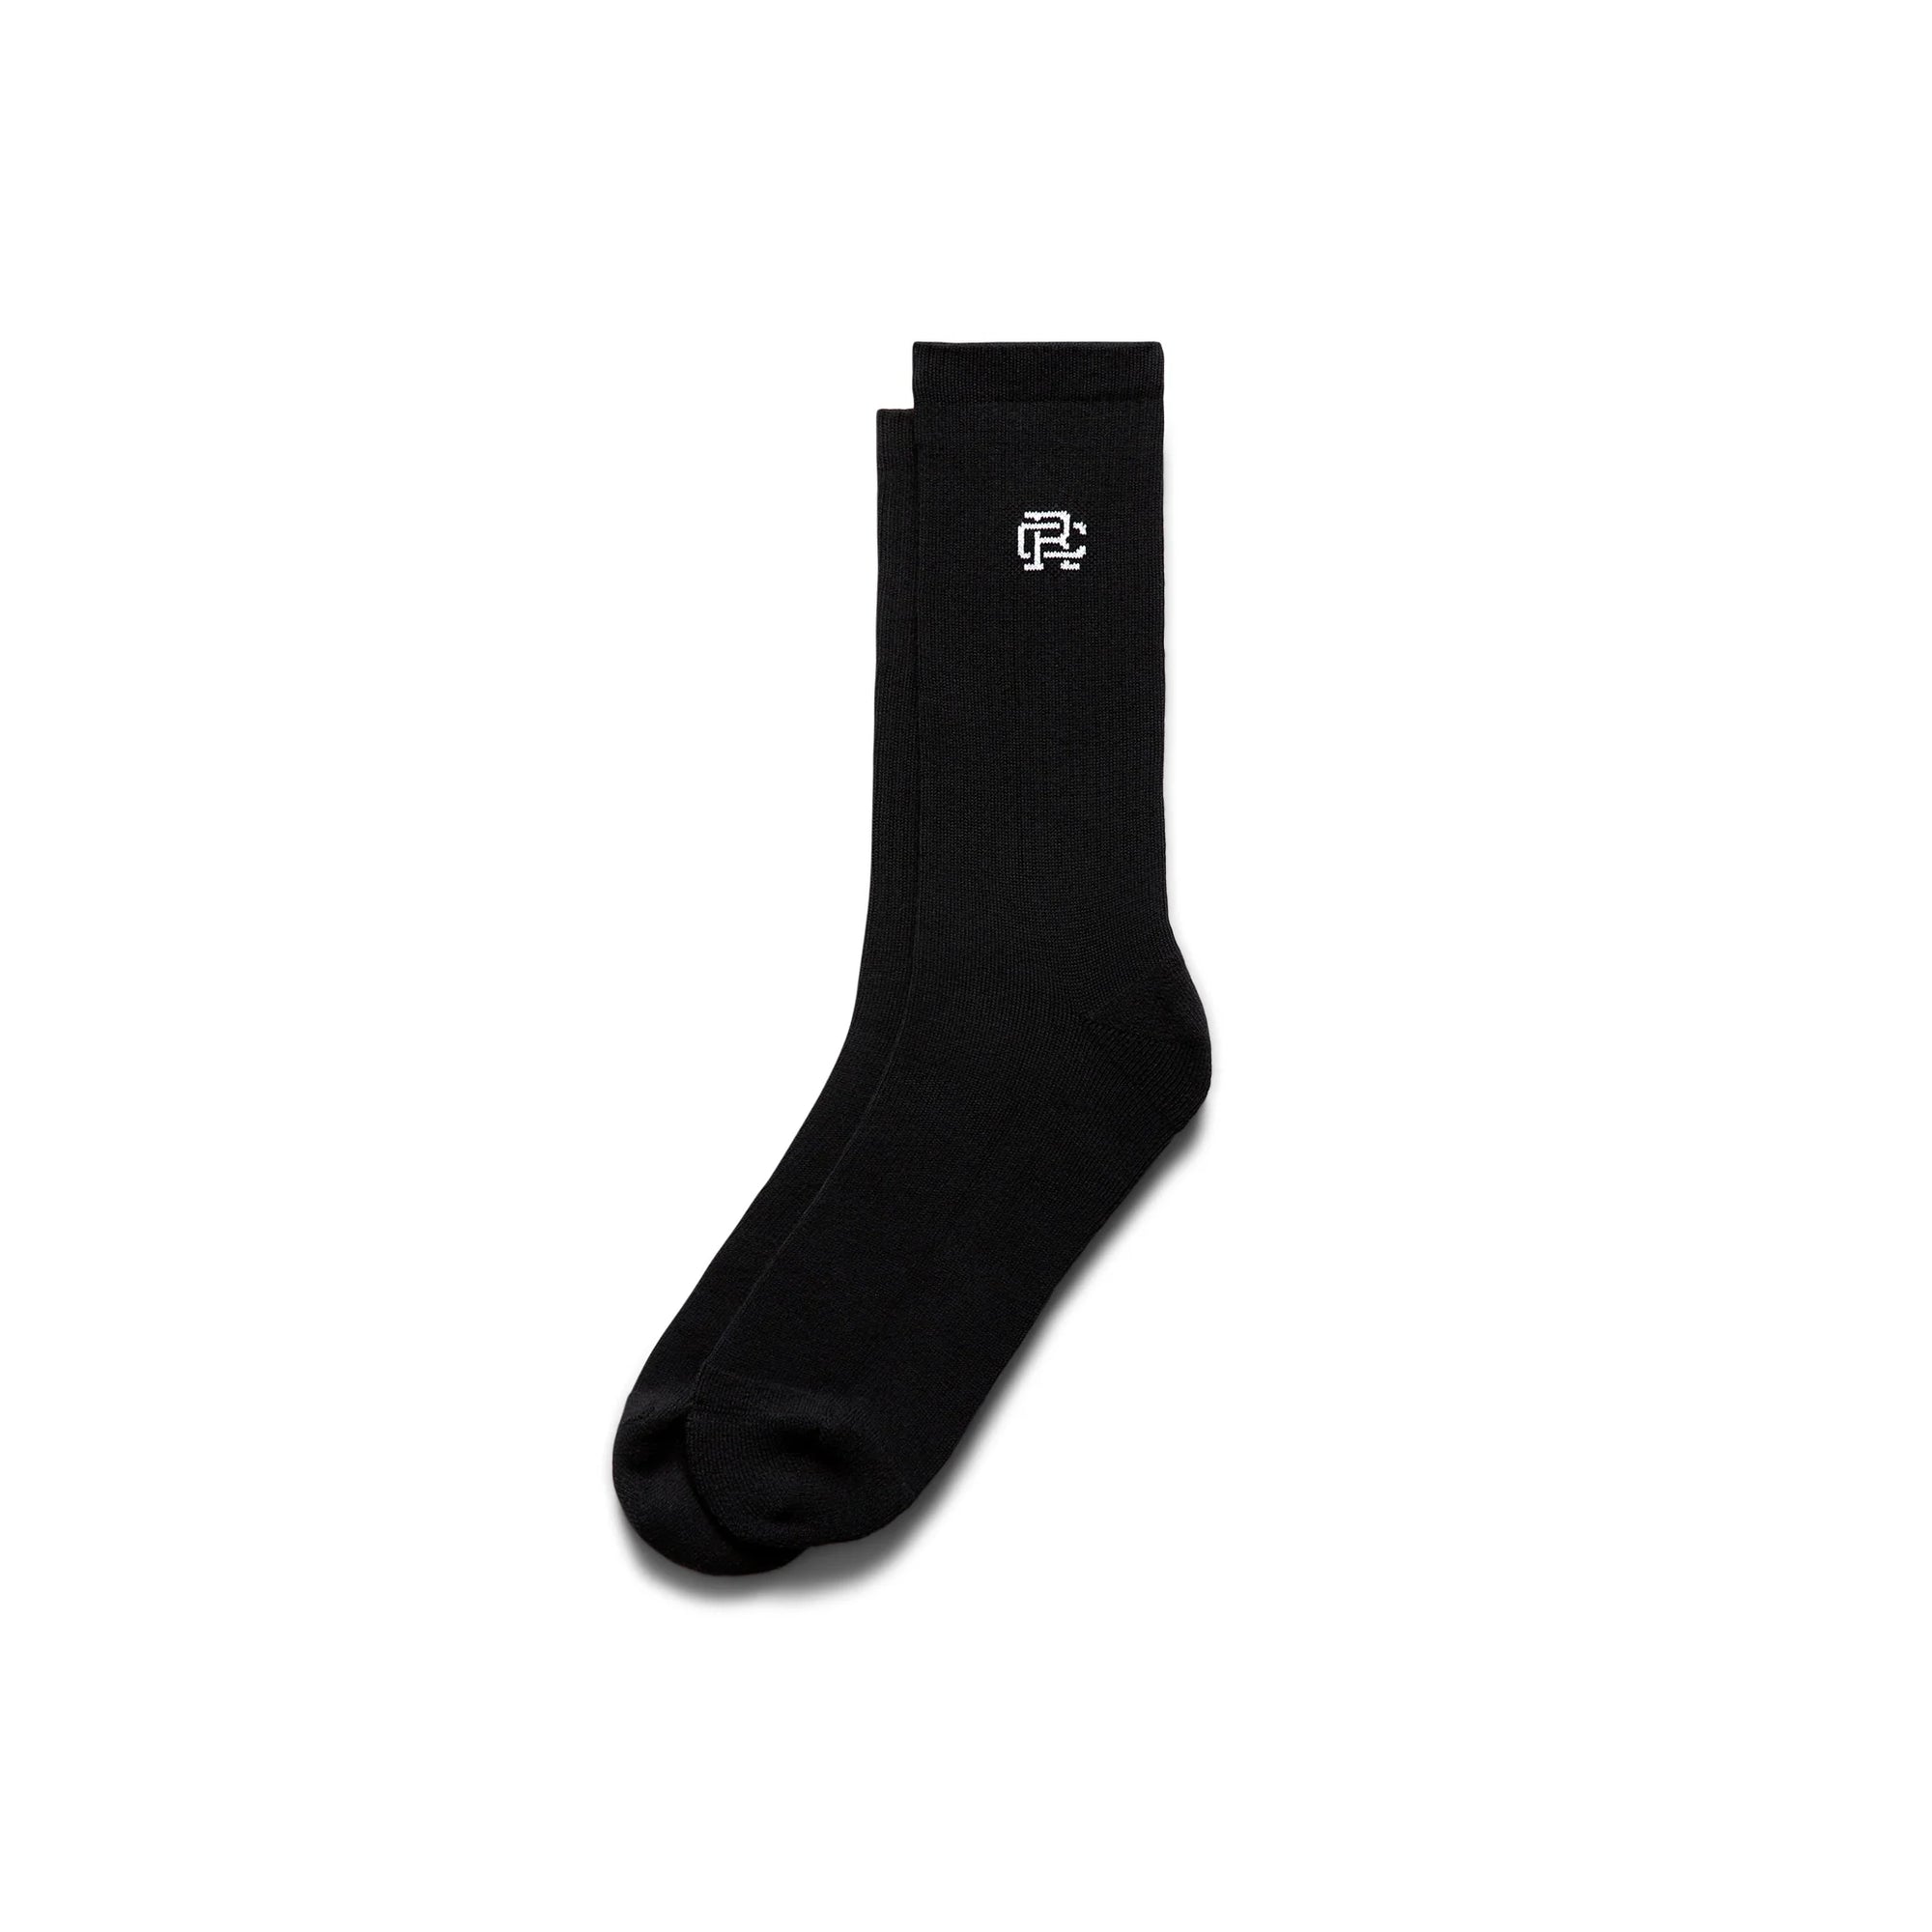 Reigning Champ Classic Crew Sock in Black